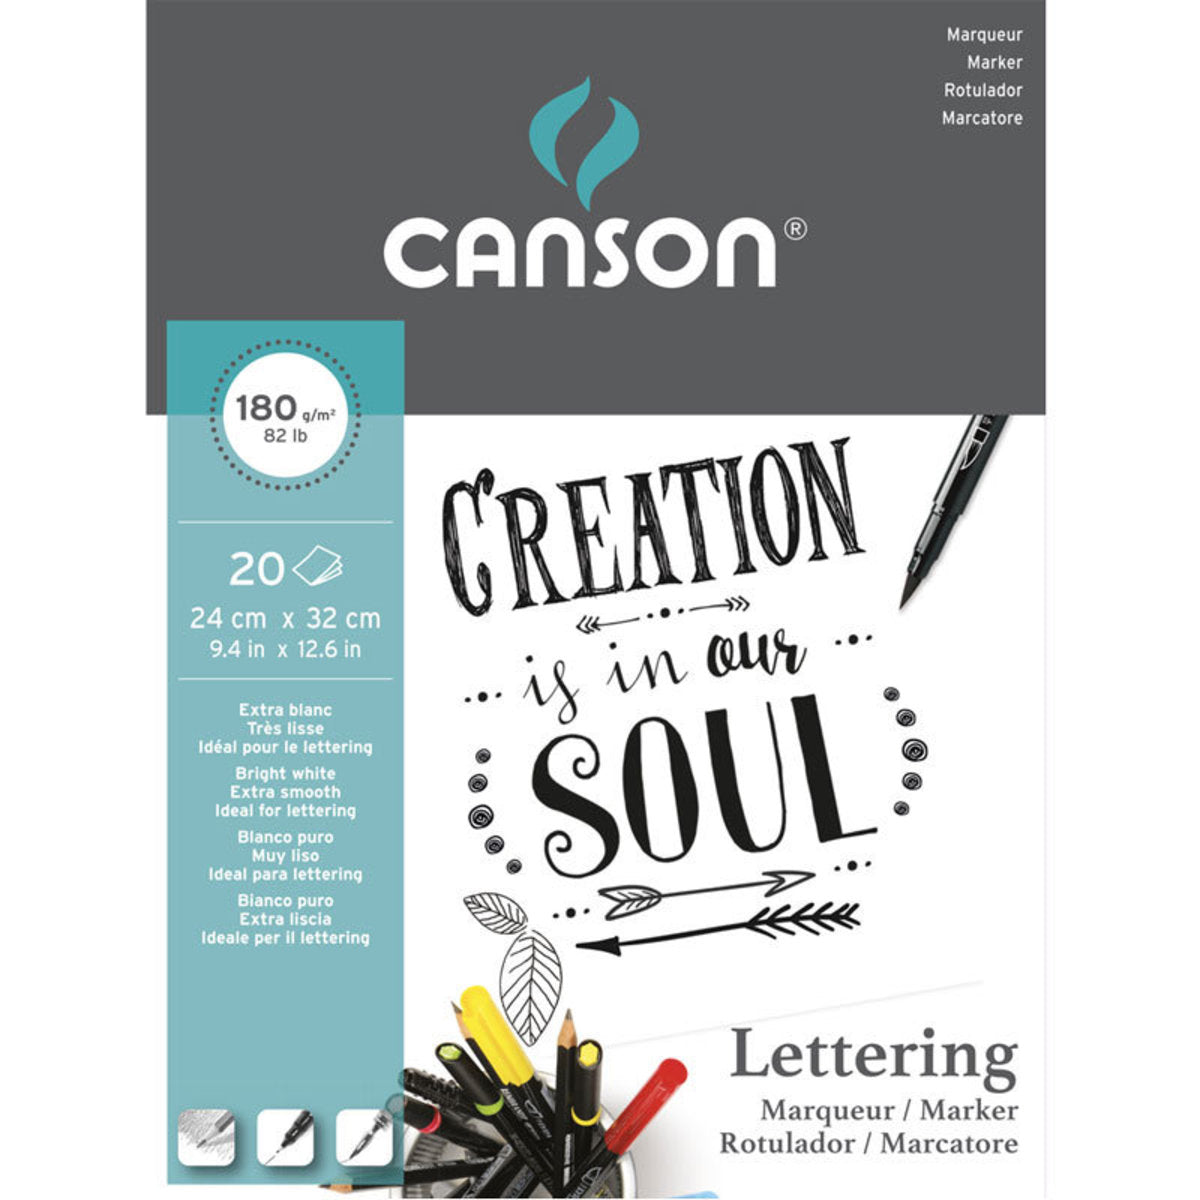 Canson Lettering Pad - Marker